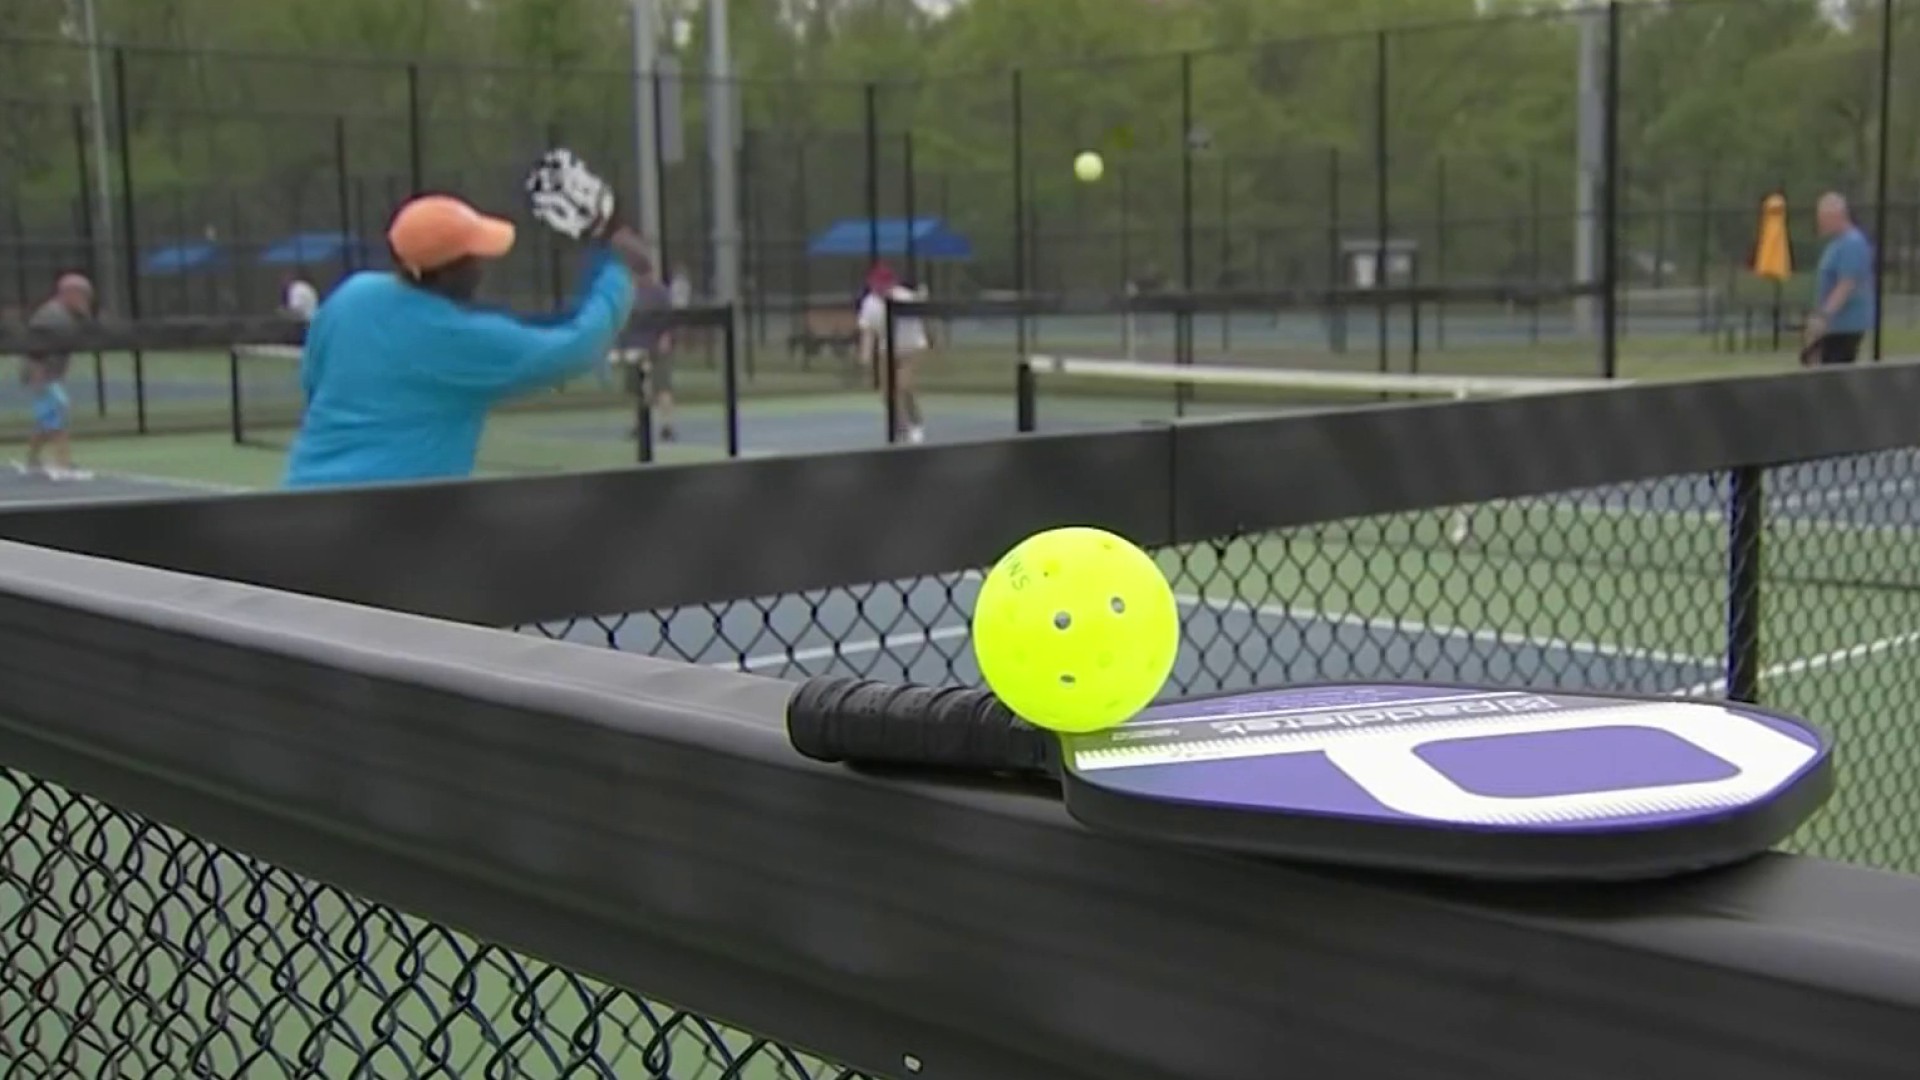 Does Pickleball Damage Tennis Courts? Debunking the Myth